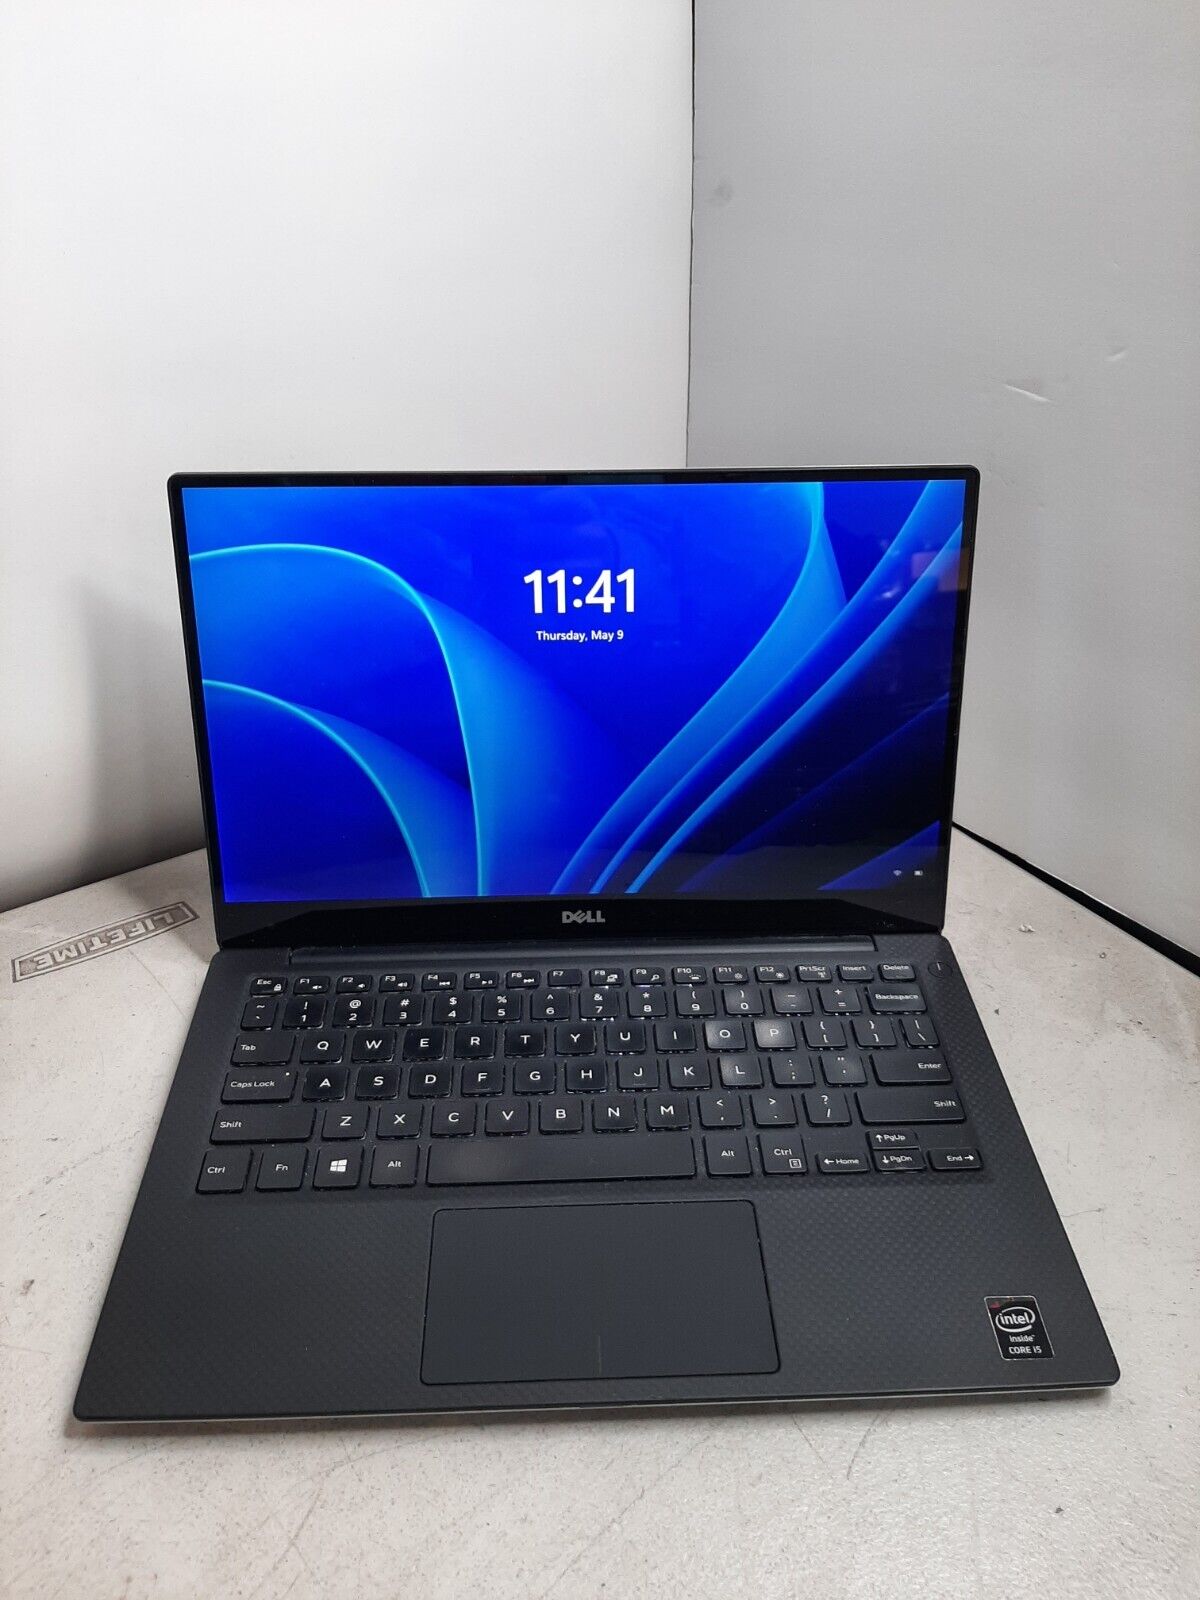 Dell XPS 13 9343  Laptop I5-5200U 2.2GHz 8GB RAM 256GB SSD Win11 Touch #97